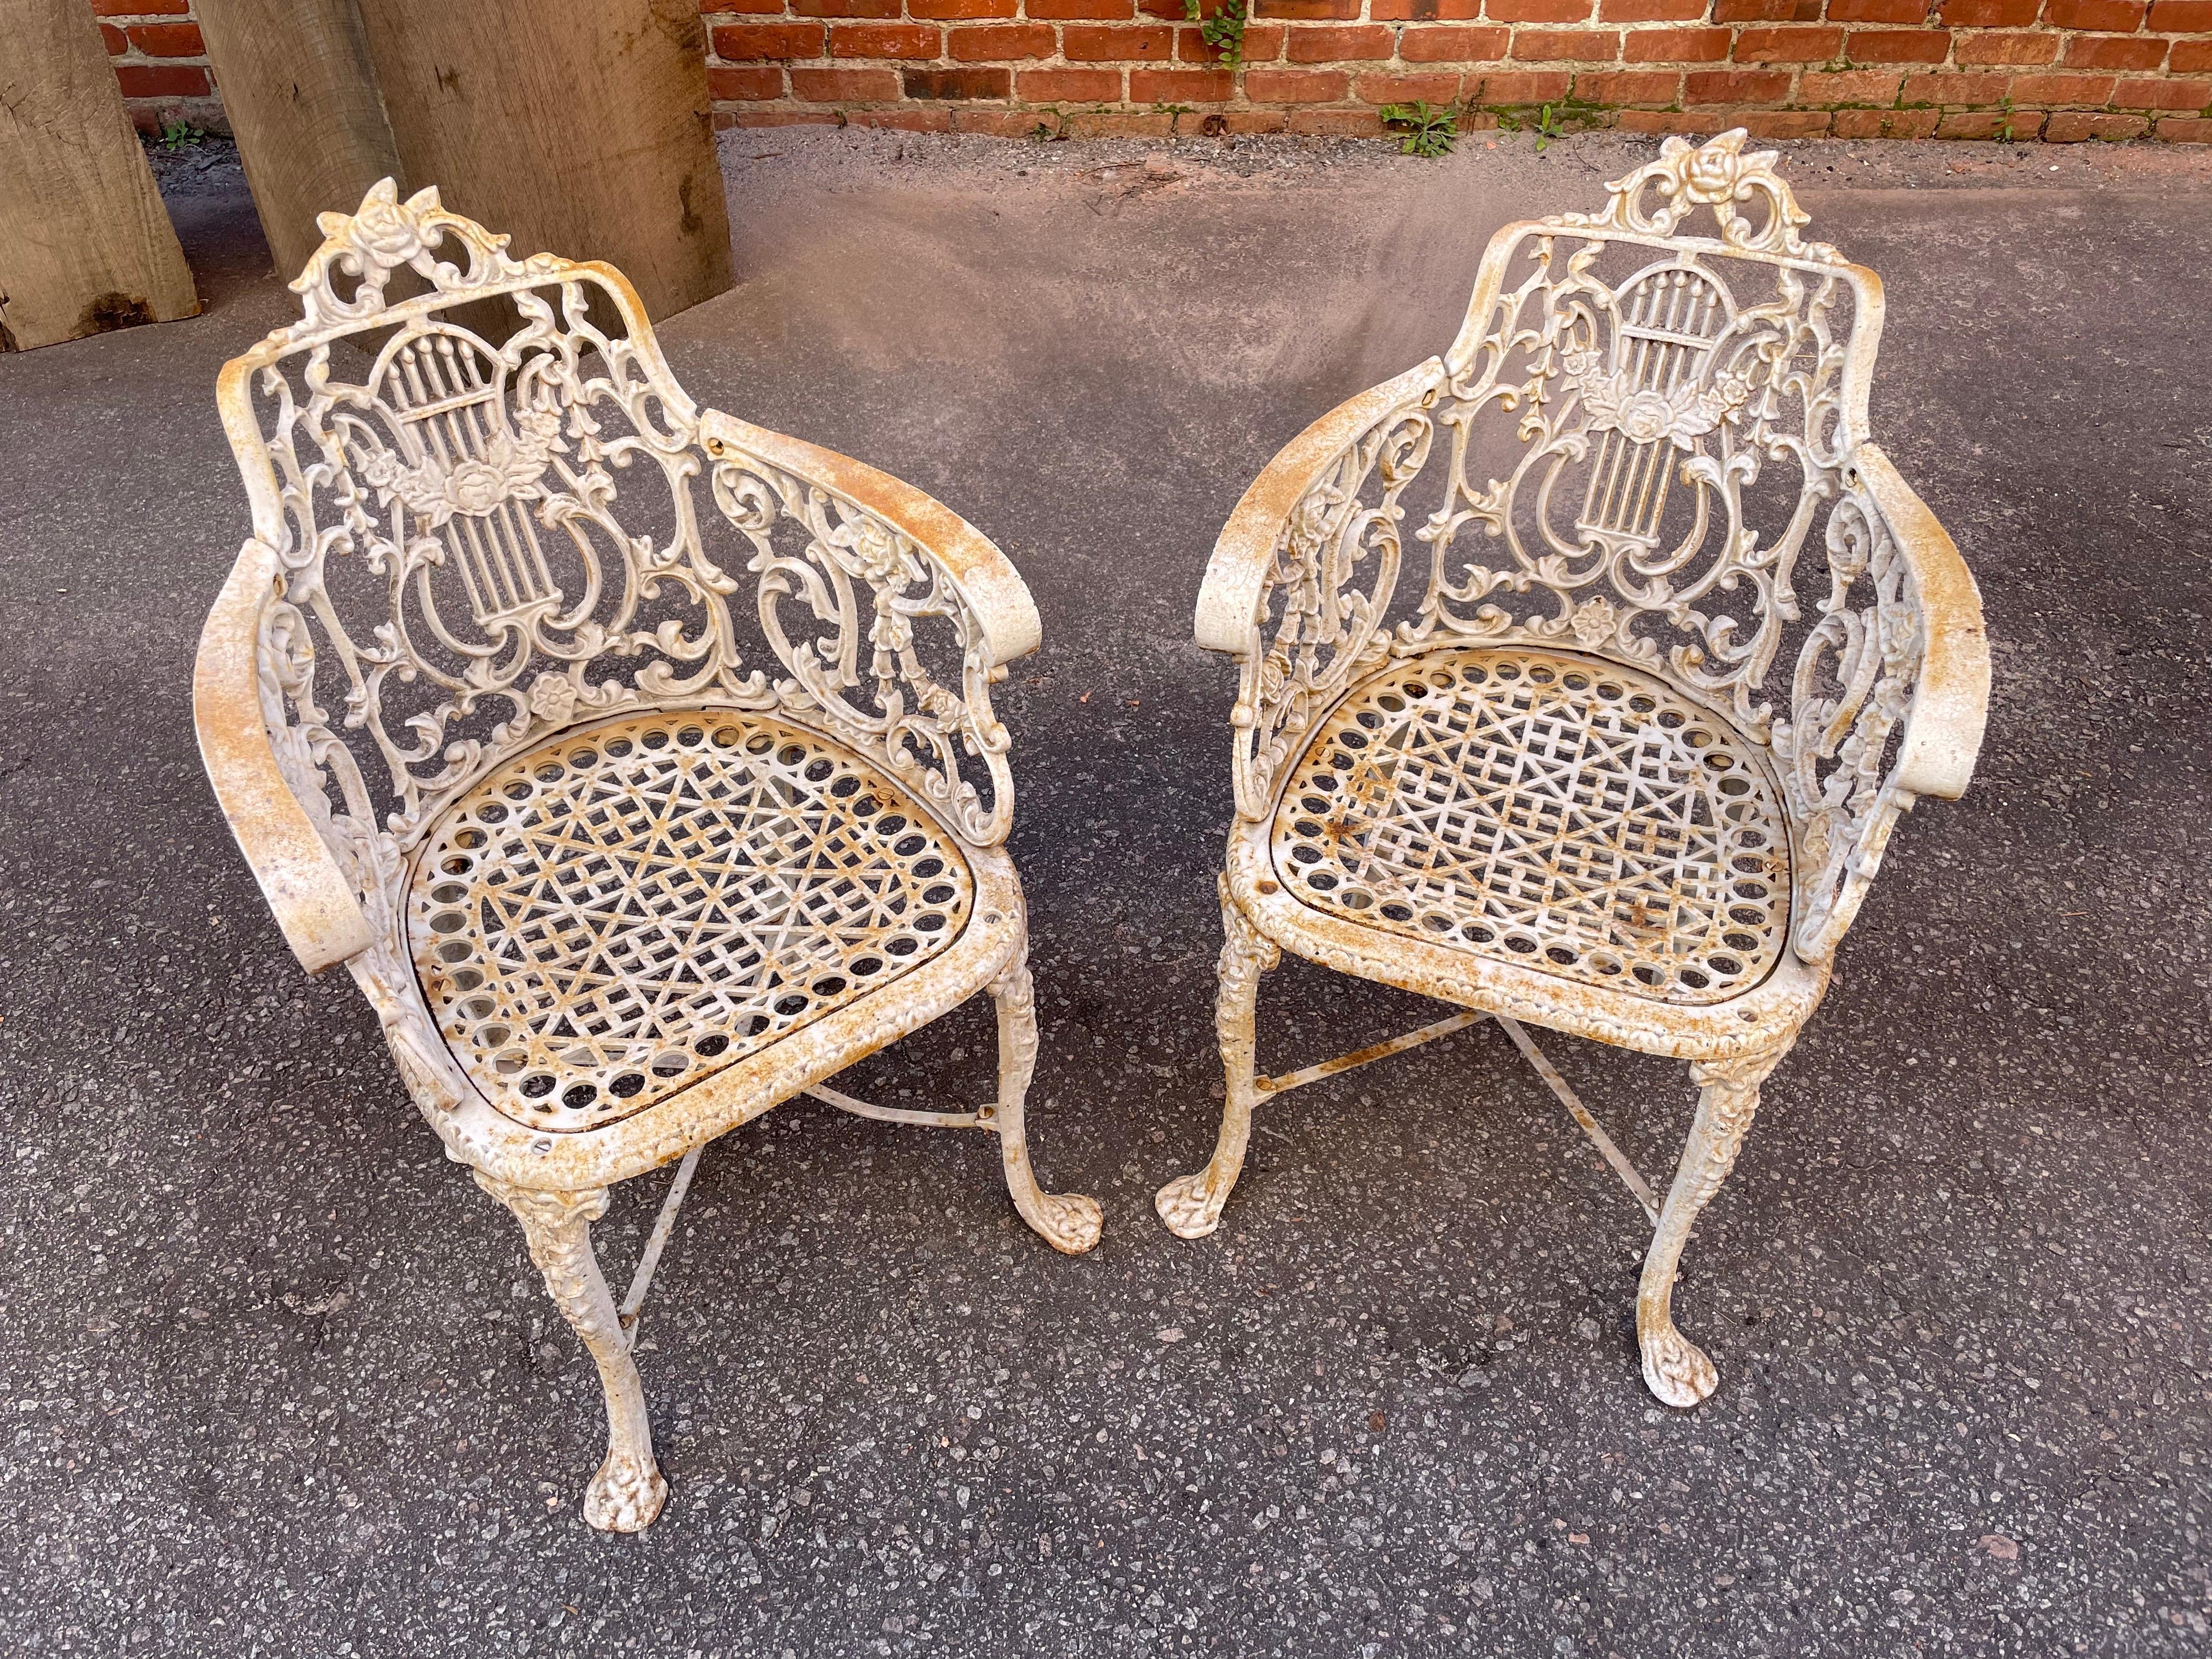 Own an authentic pair of antique Neoclassical style garden armchairs attributed to the Robert Wood Foundry. Original white painted finish on cast iron. Philadelphia, c. 1860s.